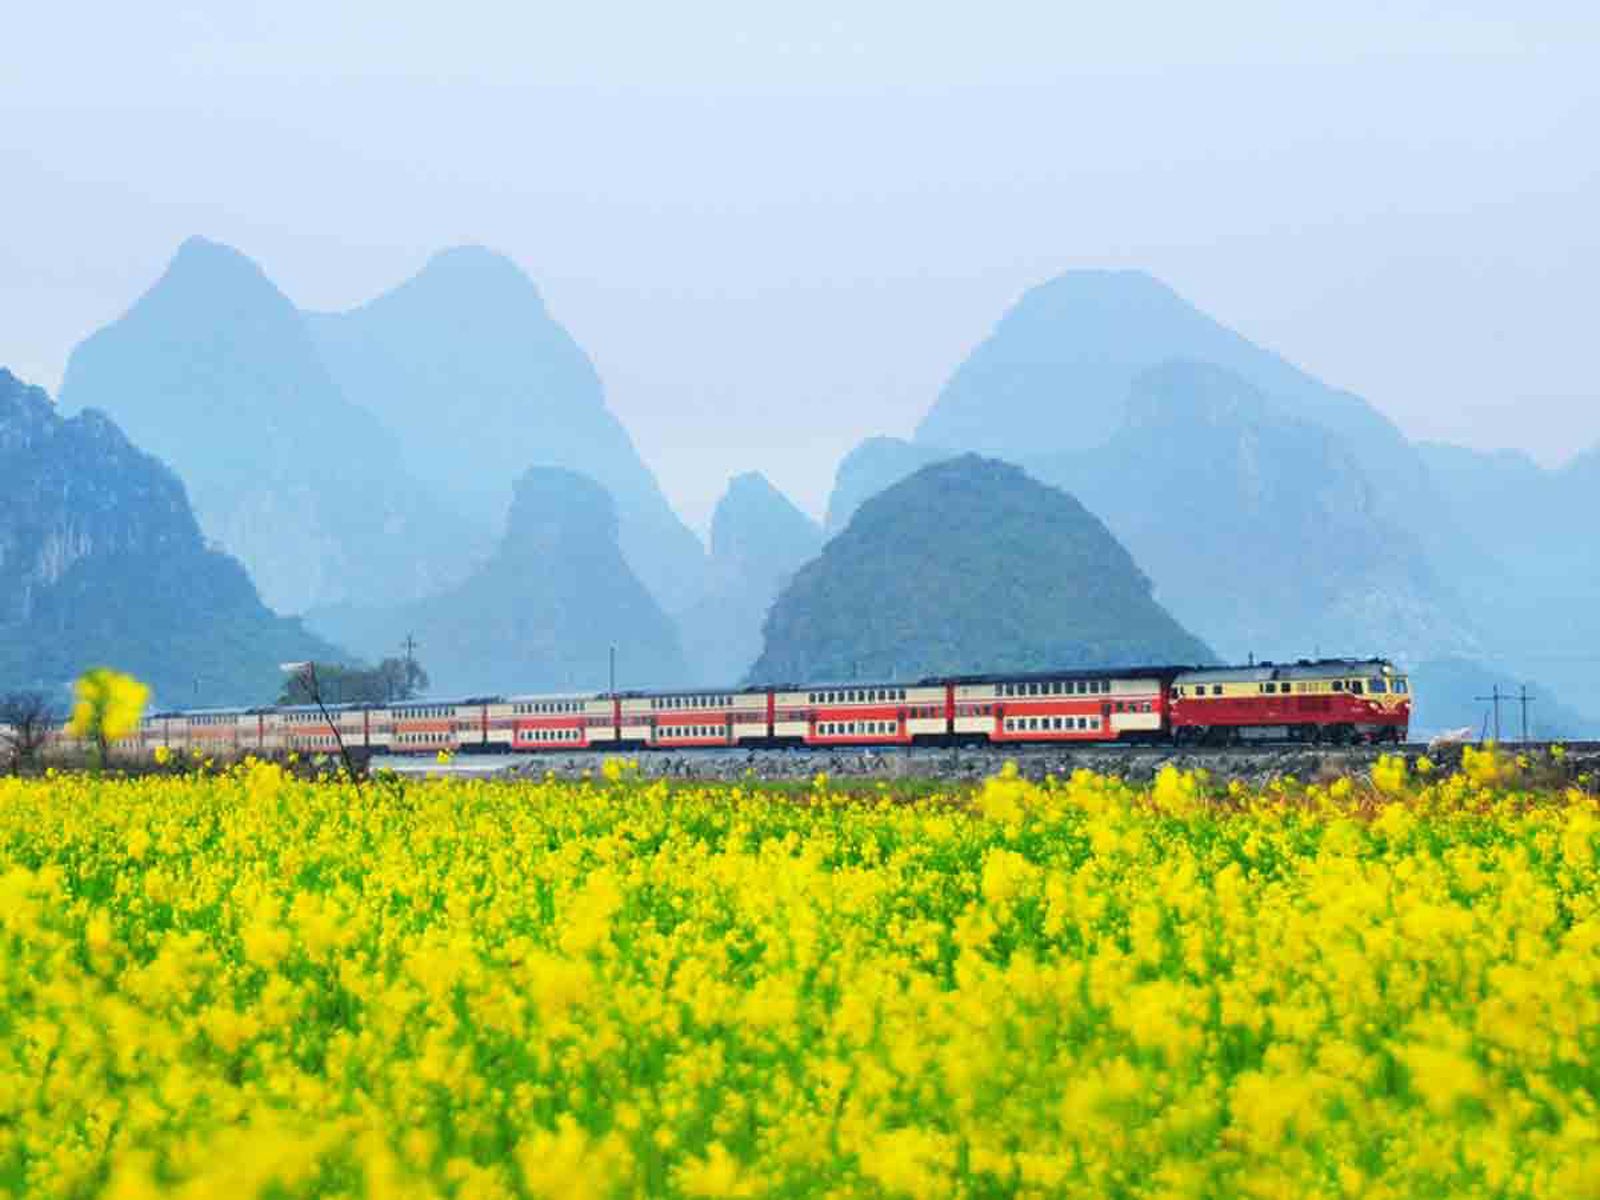 Spectacular, rarely seen images of China’s railways | CNN